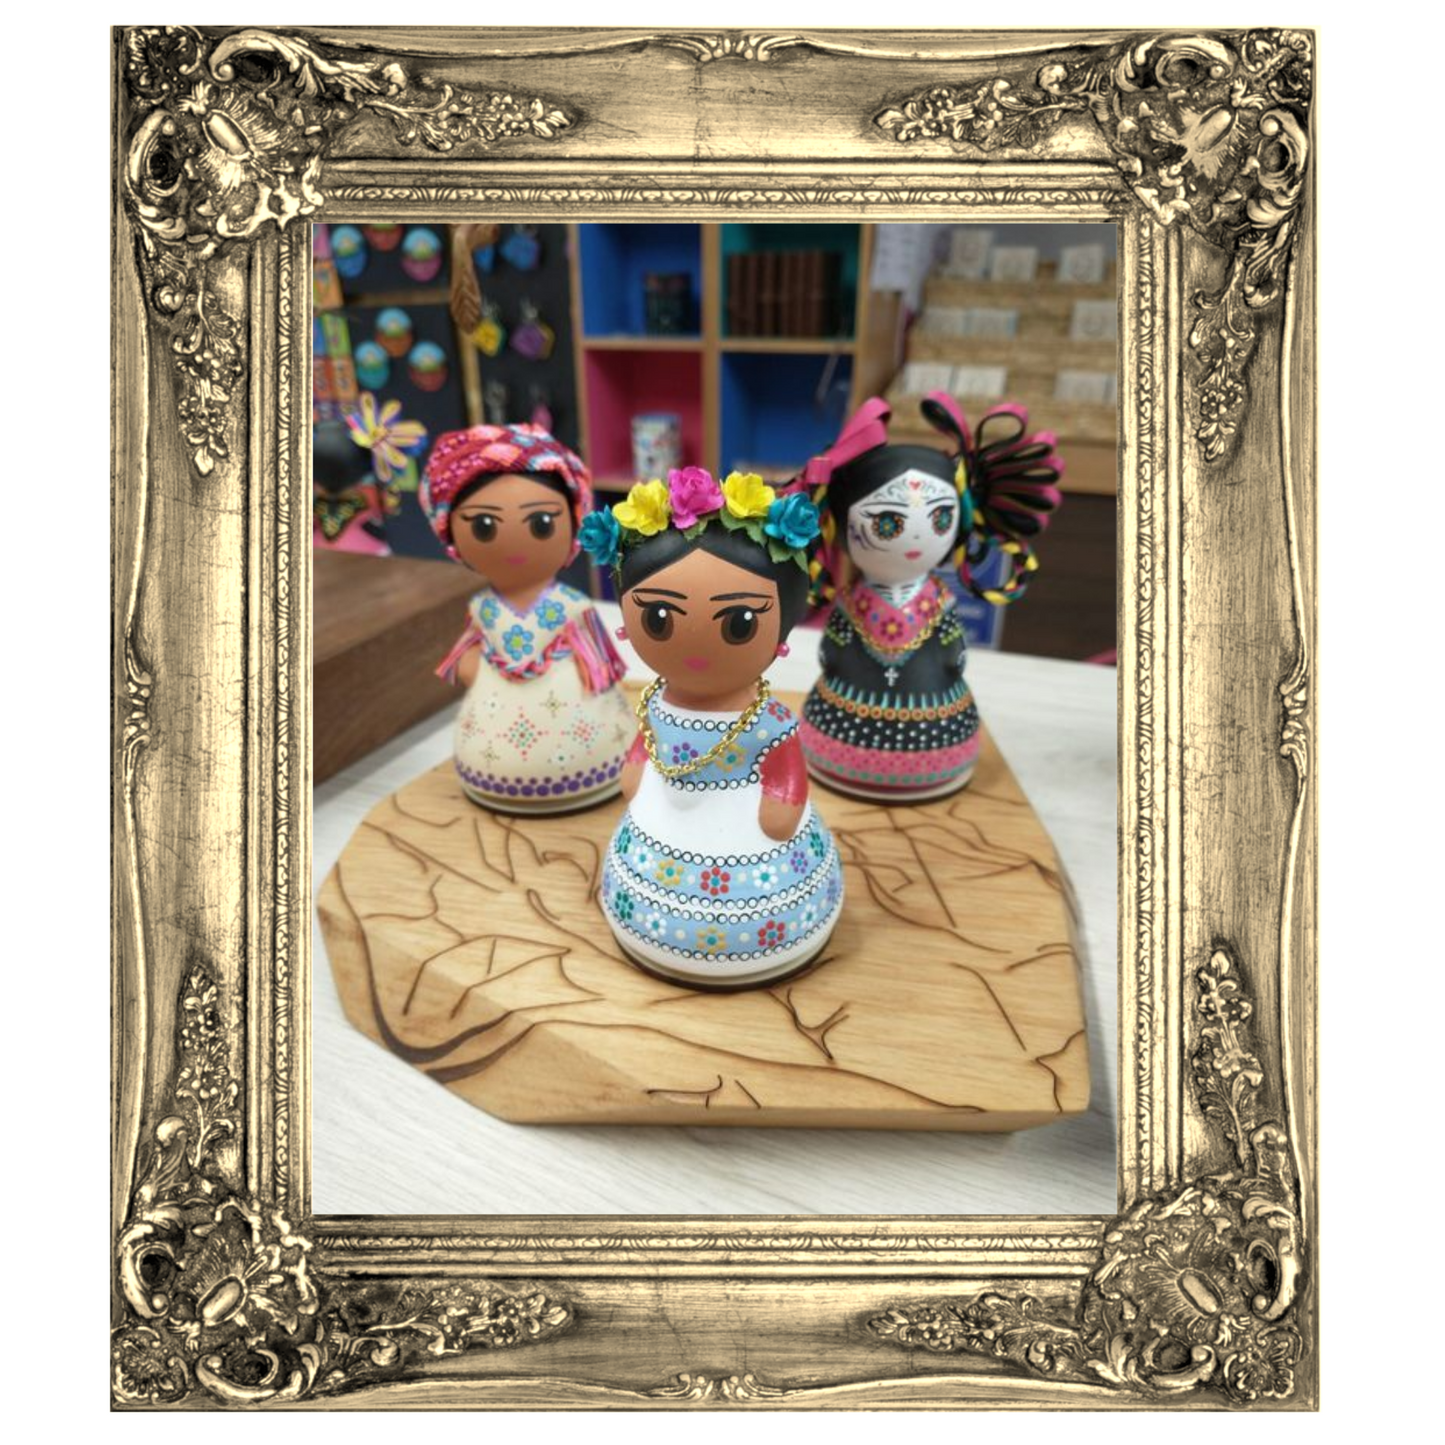 Mexican Handmade Clay Folklore Figurines- Jarabe Tapatio MeXican Artisan Fashion & Design